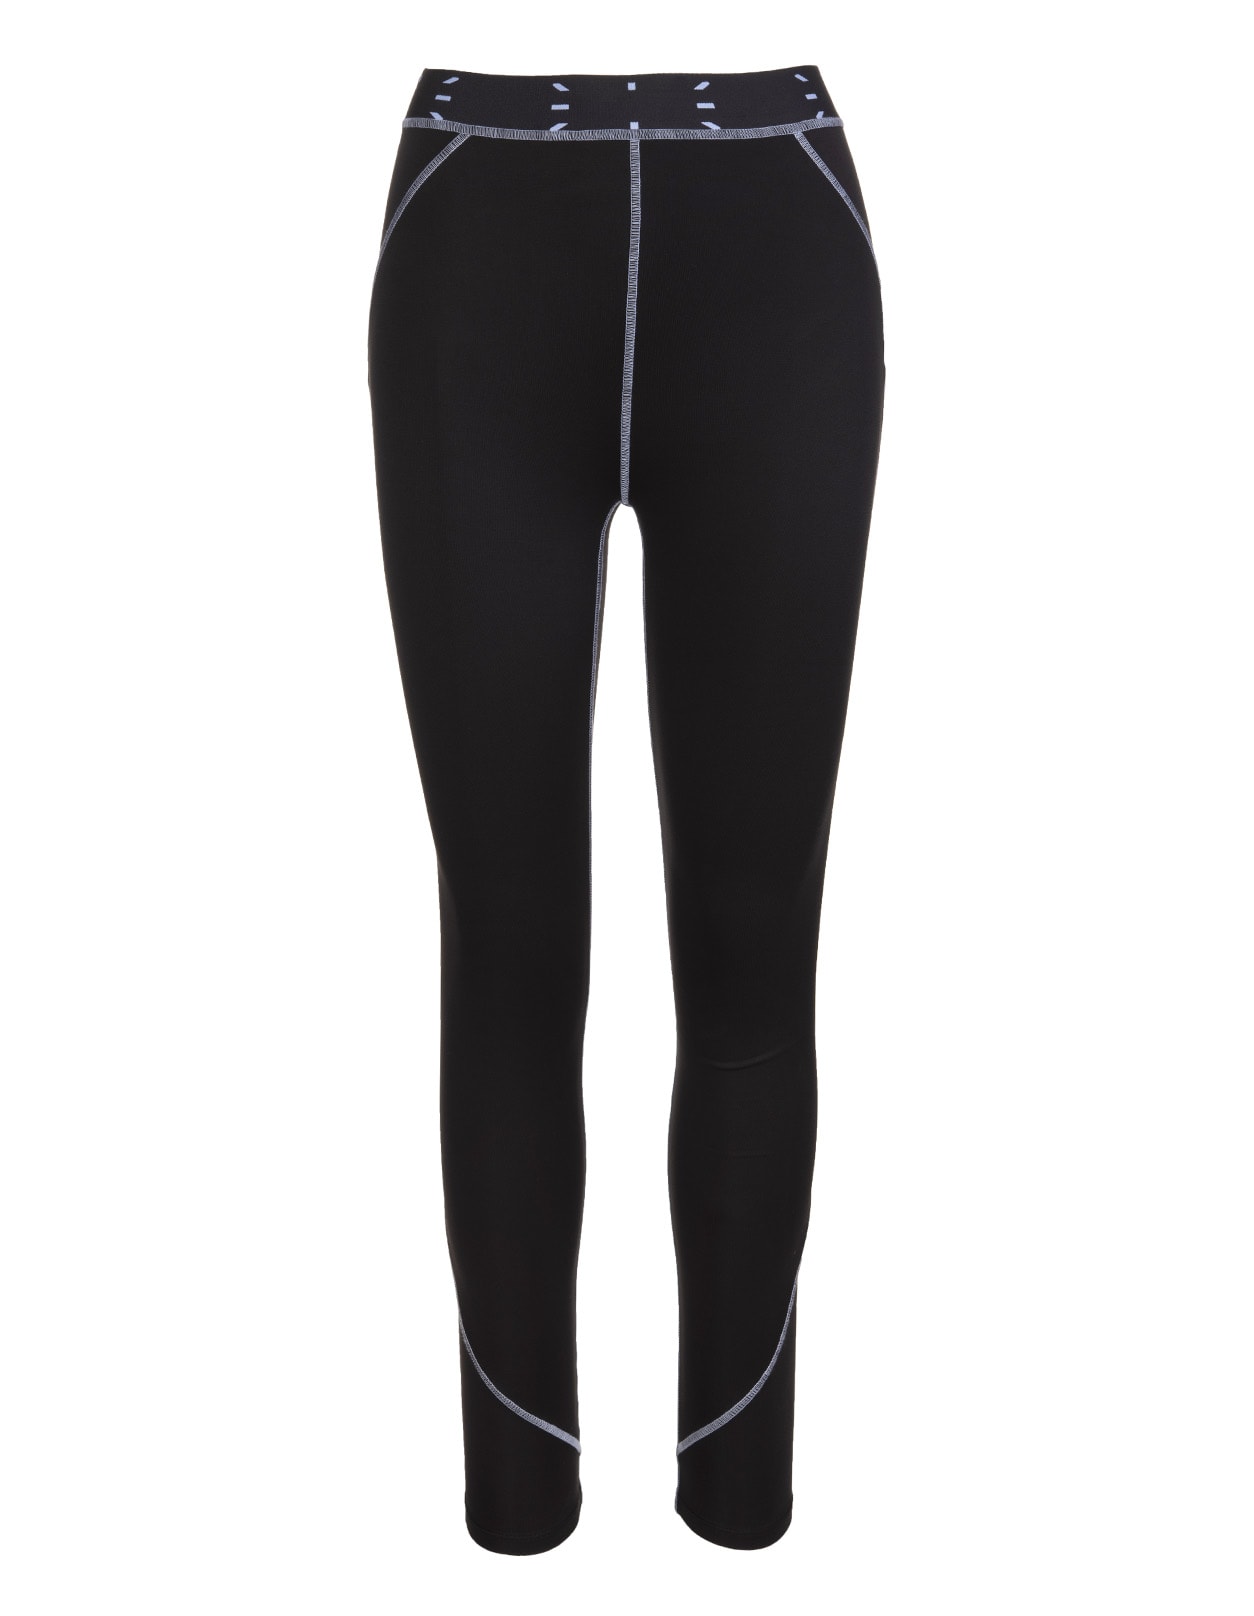 McQ Alexander McQueen Woman Black Sports Leggings With Contrast Stitching